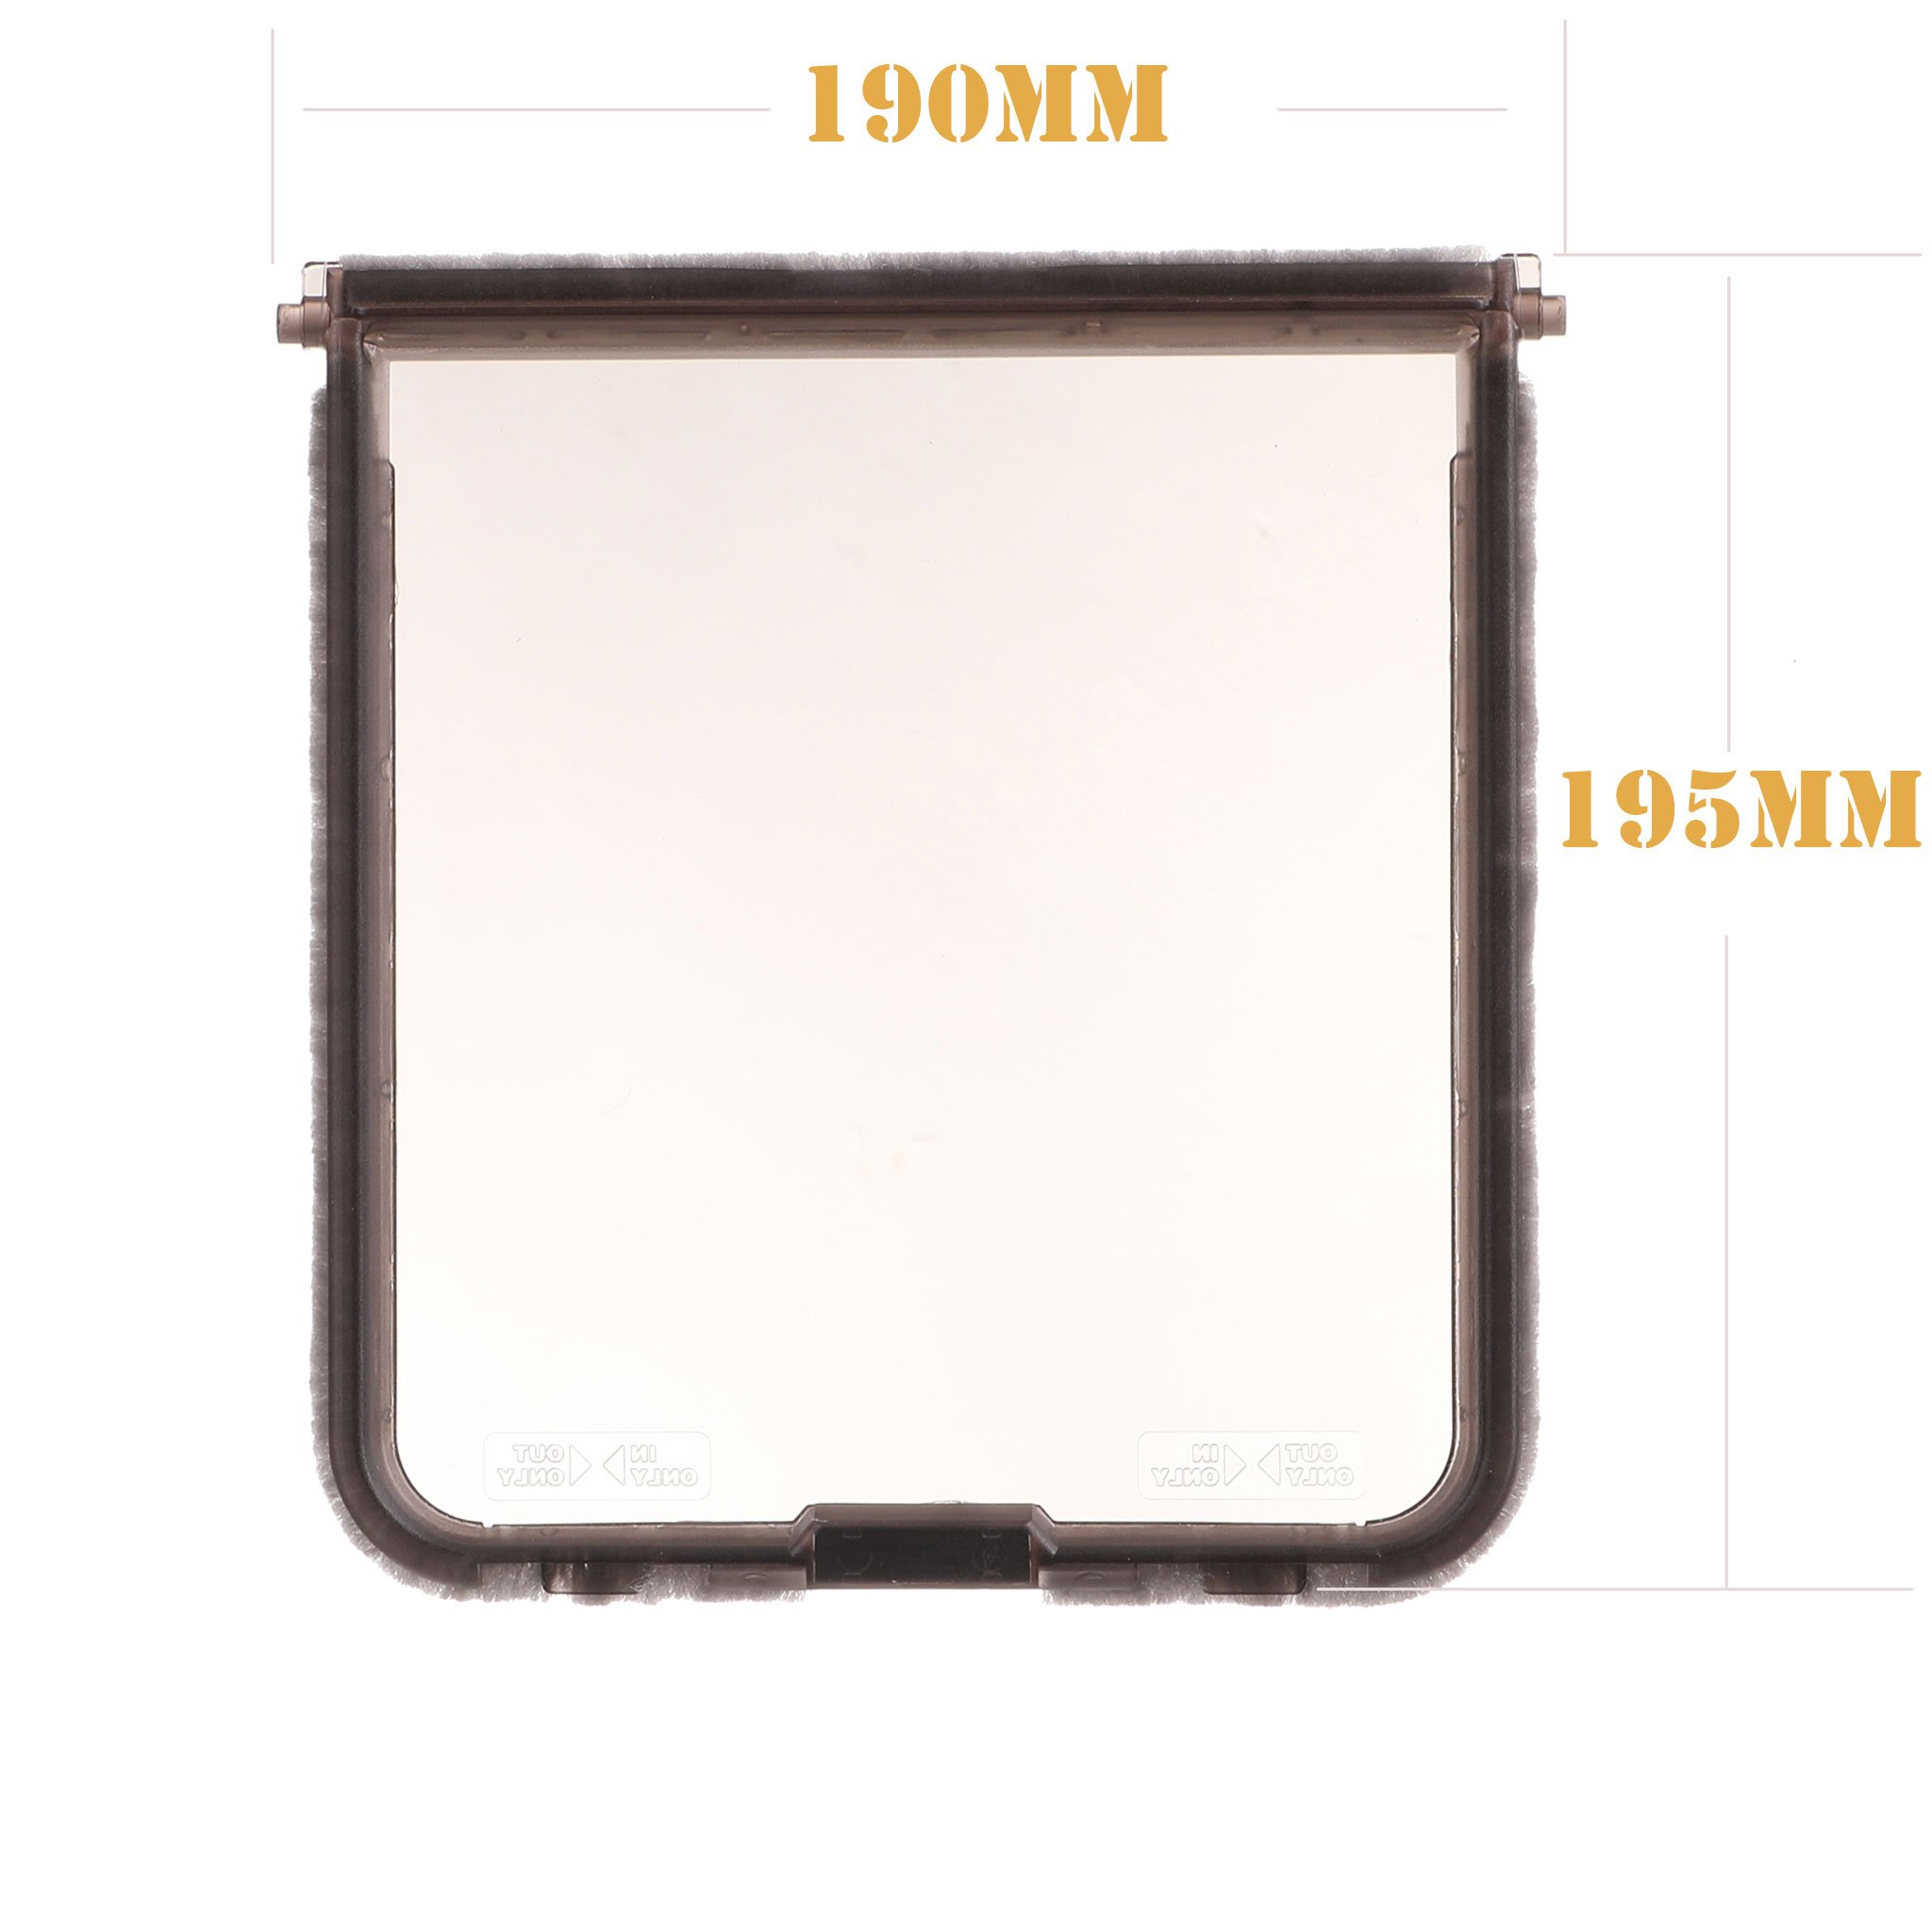 Detailed sizes of the Dog Mate small dog door replacement flap.